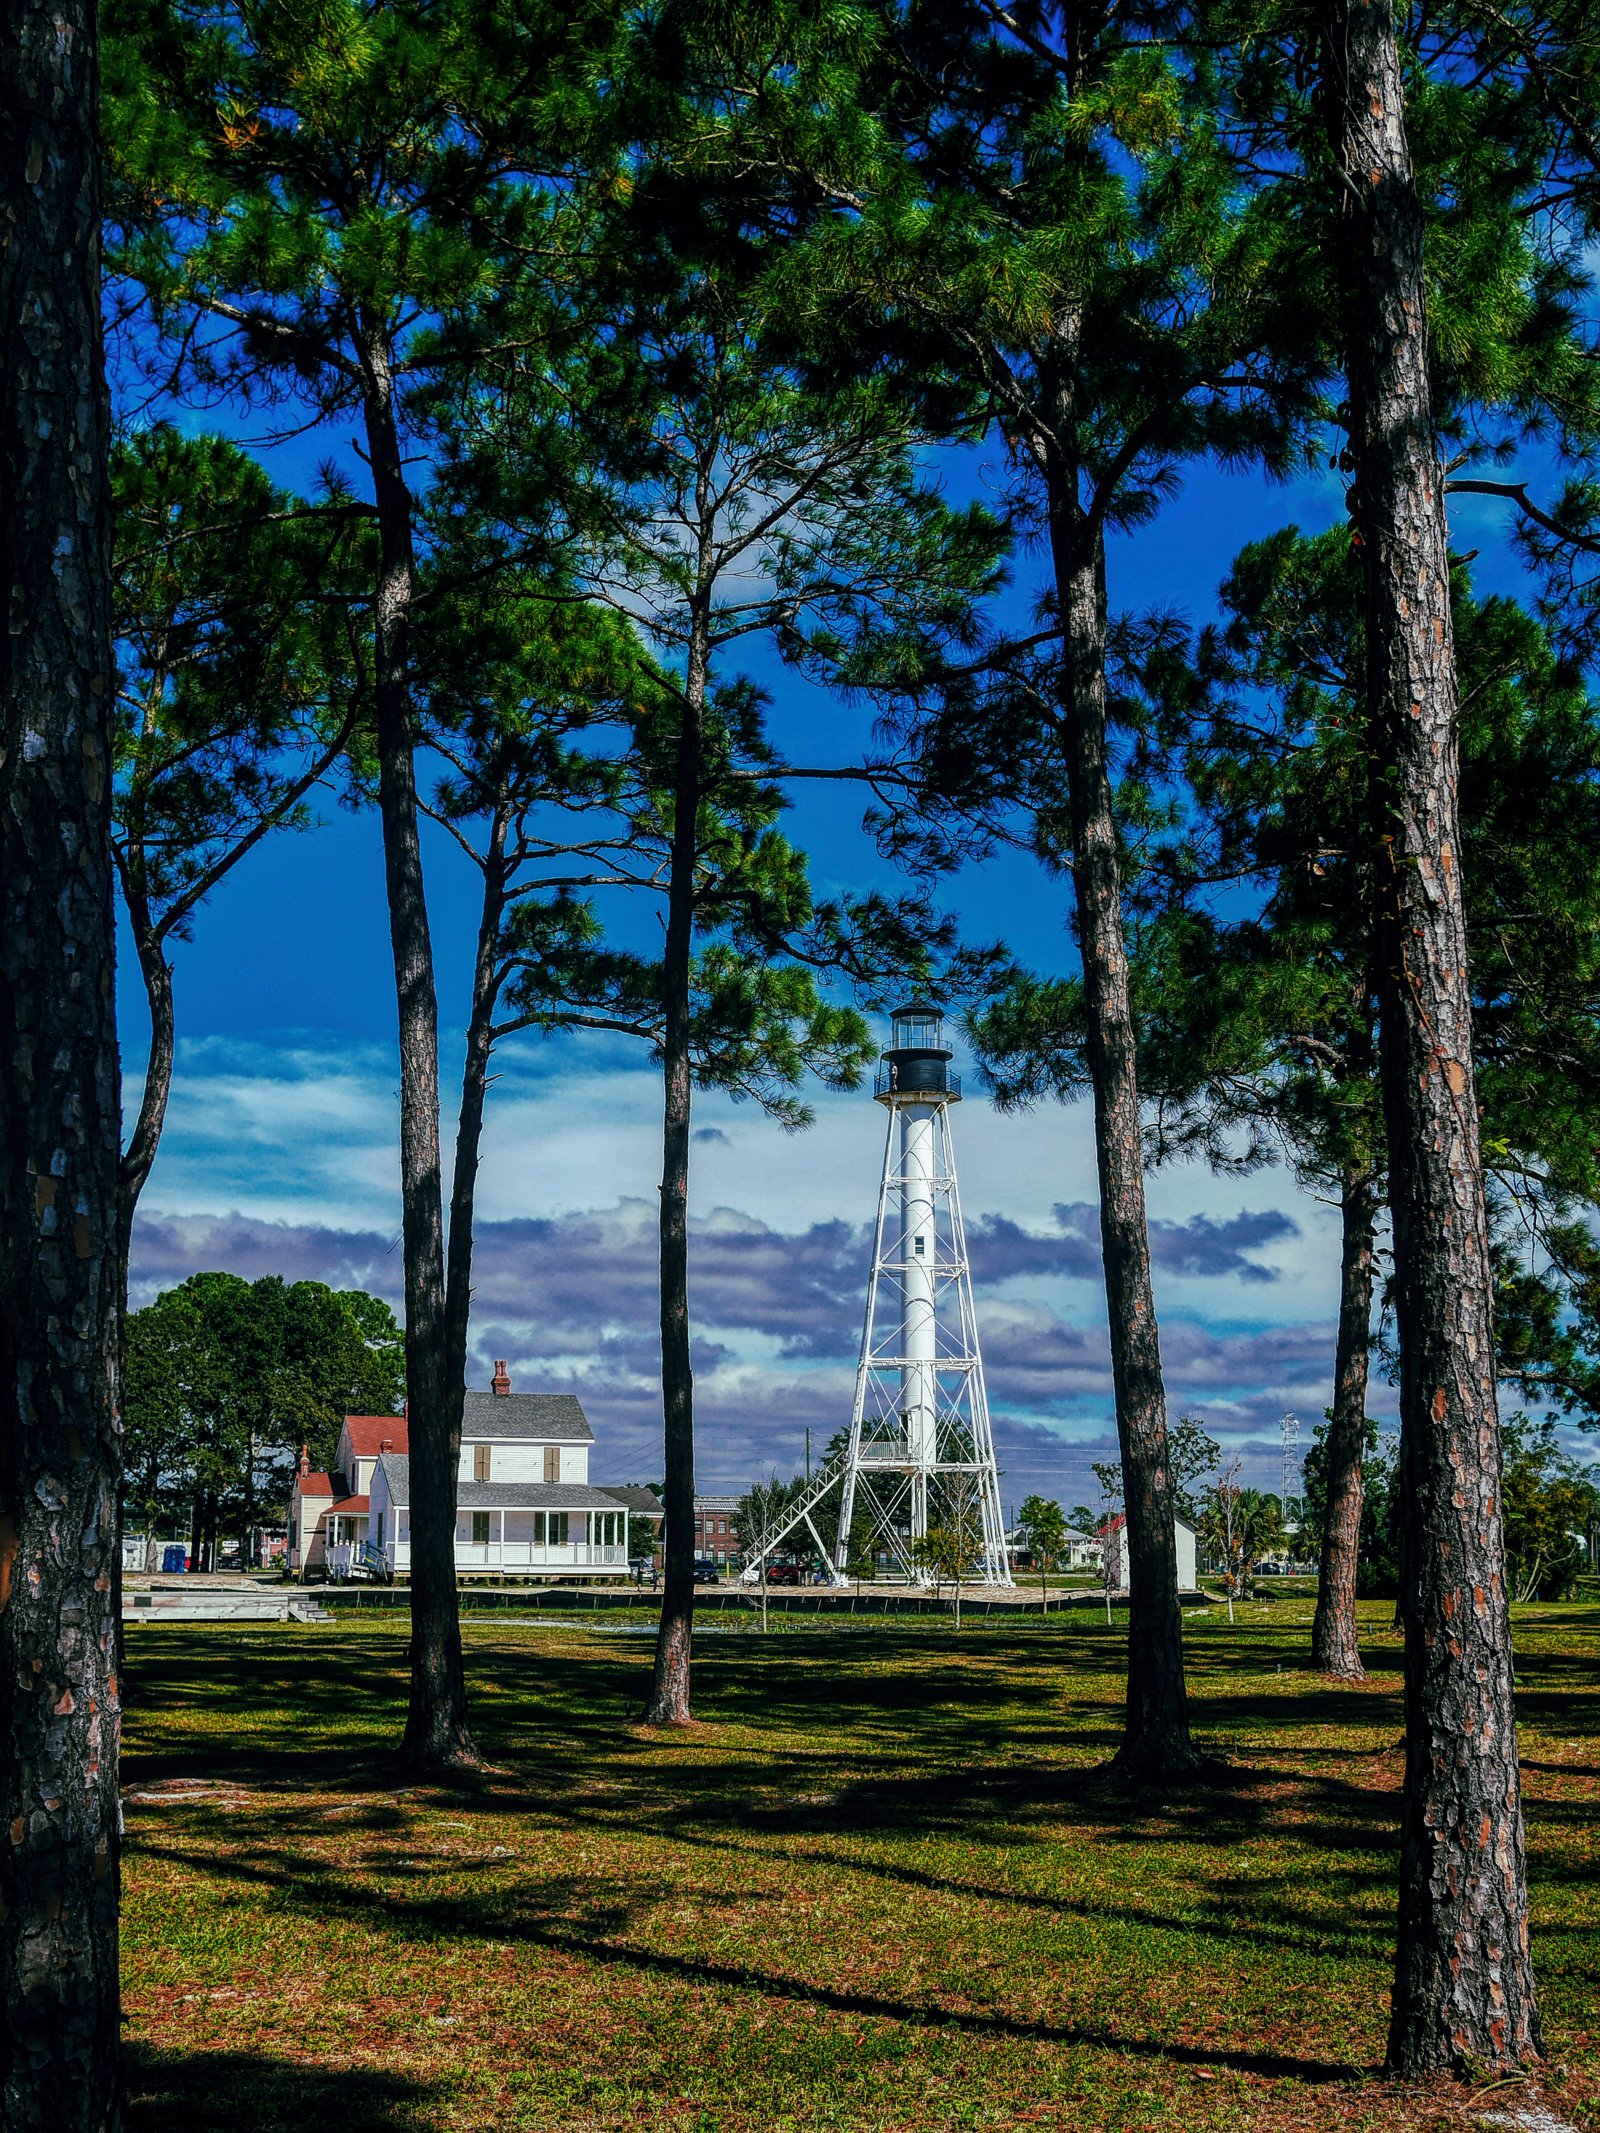 Cape San Blas Lighthouse relocated to George Core Park in Port St. Joe, aka Lighthouse Park